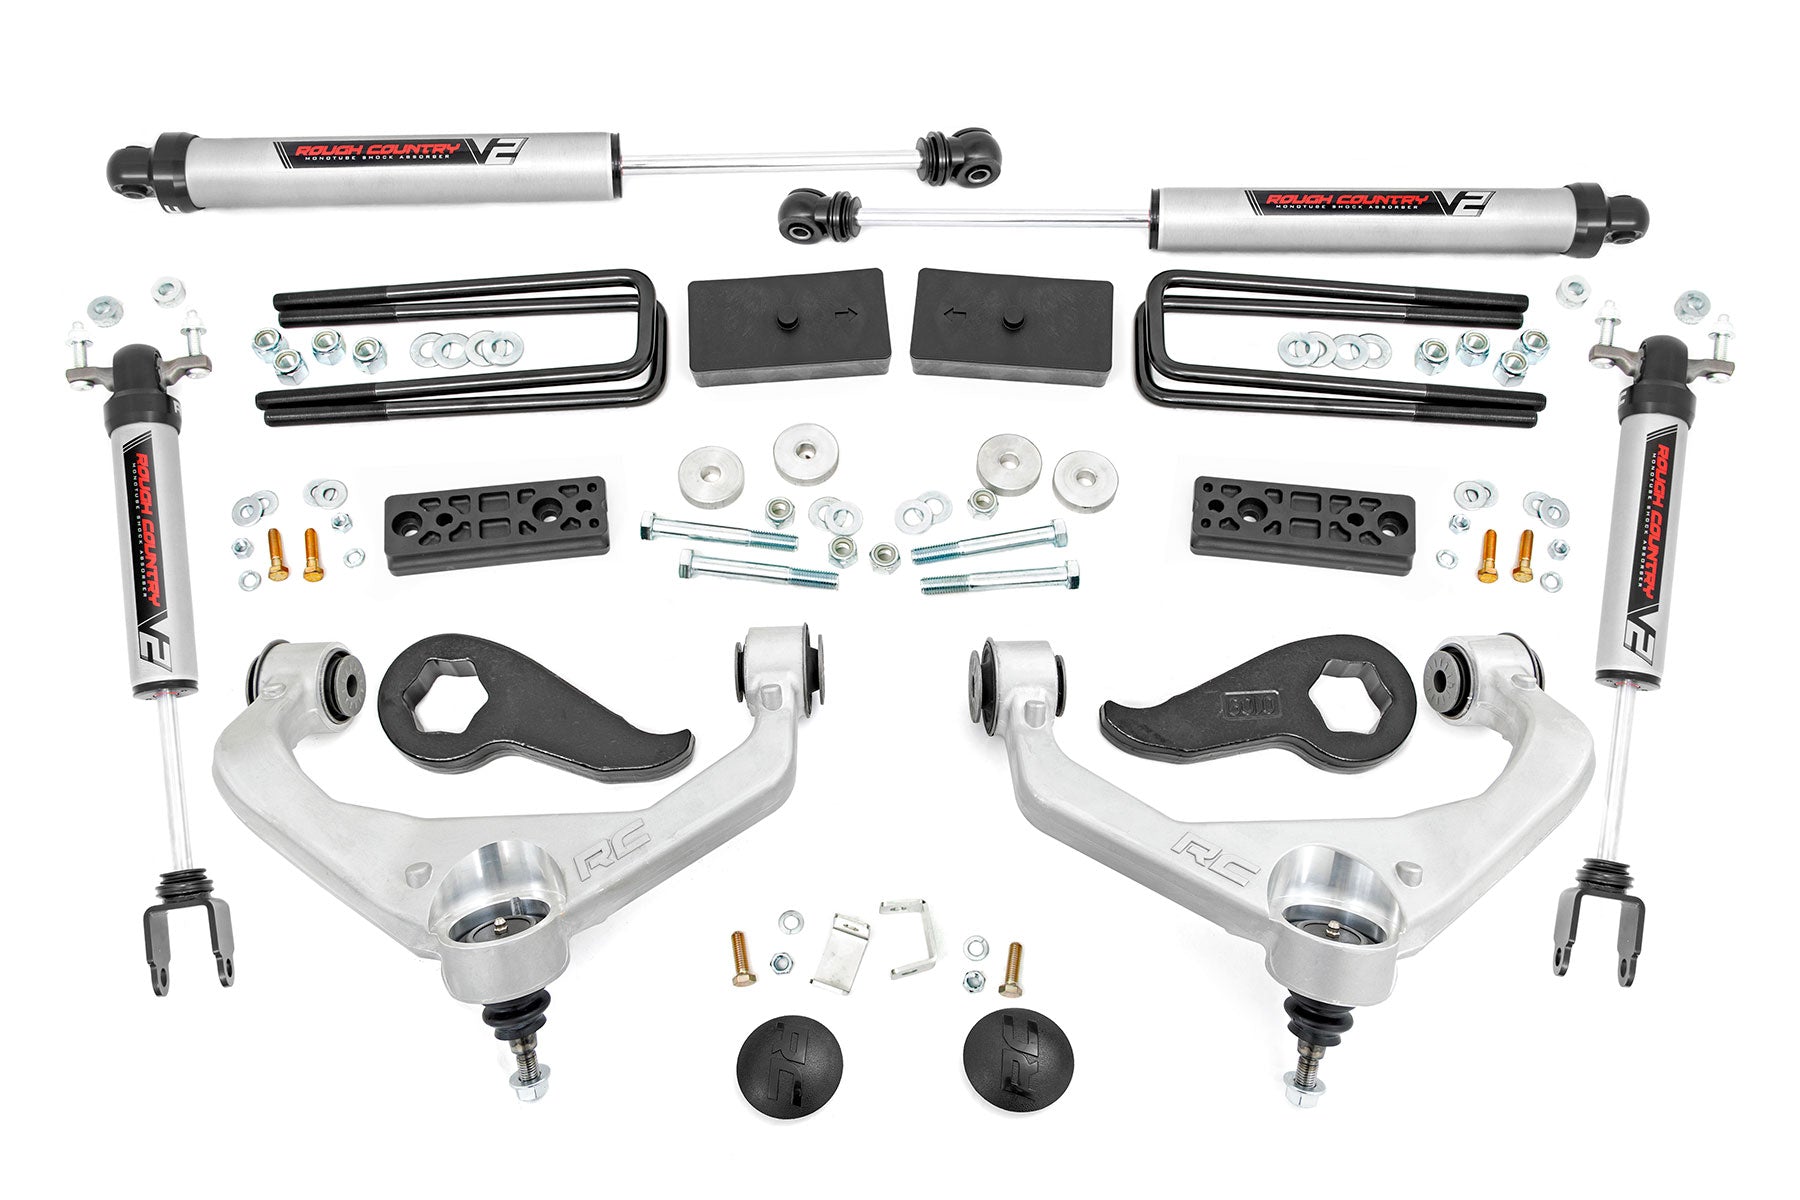 Rough Country (95730RED) 3.5 inch Lift Kit | Knuckle | Chevy/GMC 2500HD/3500HD (11-19)